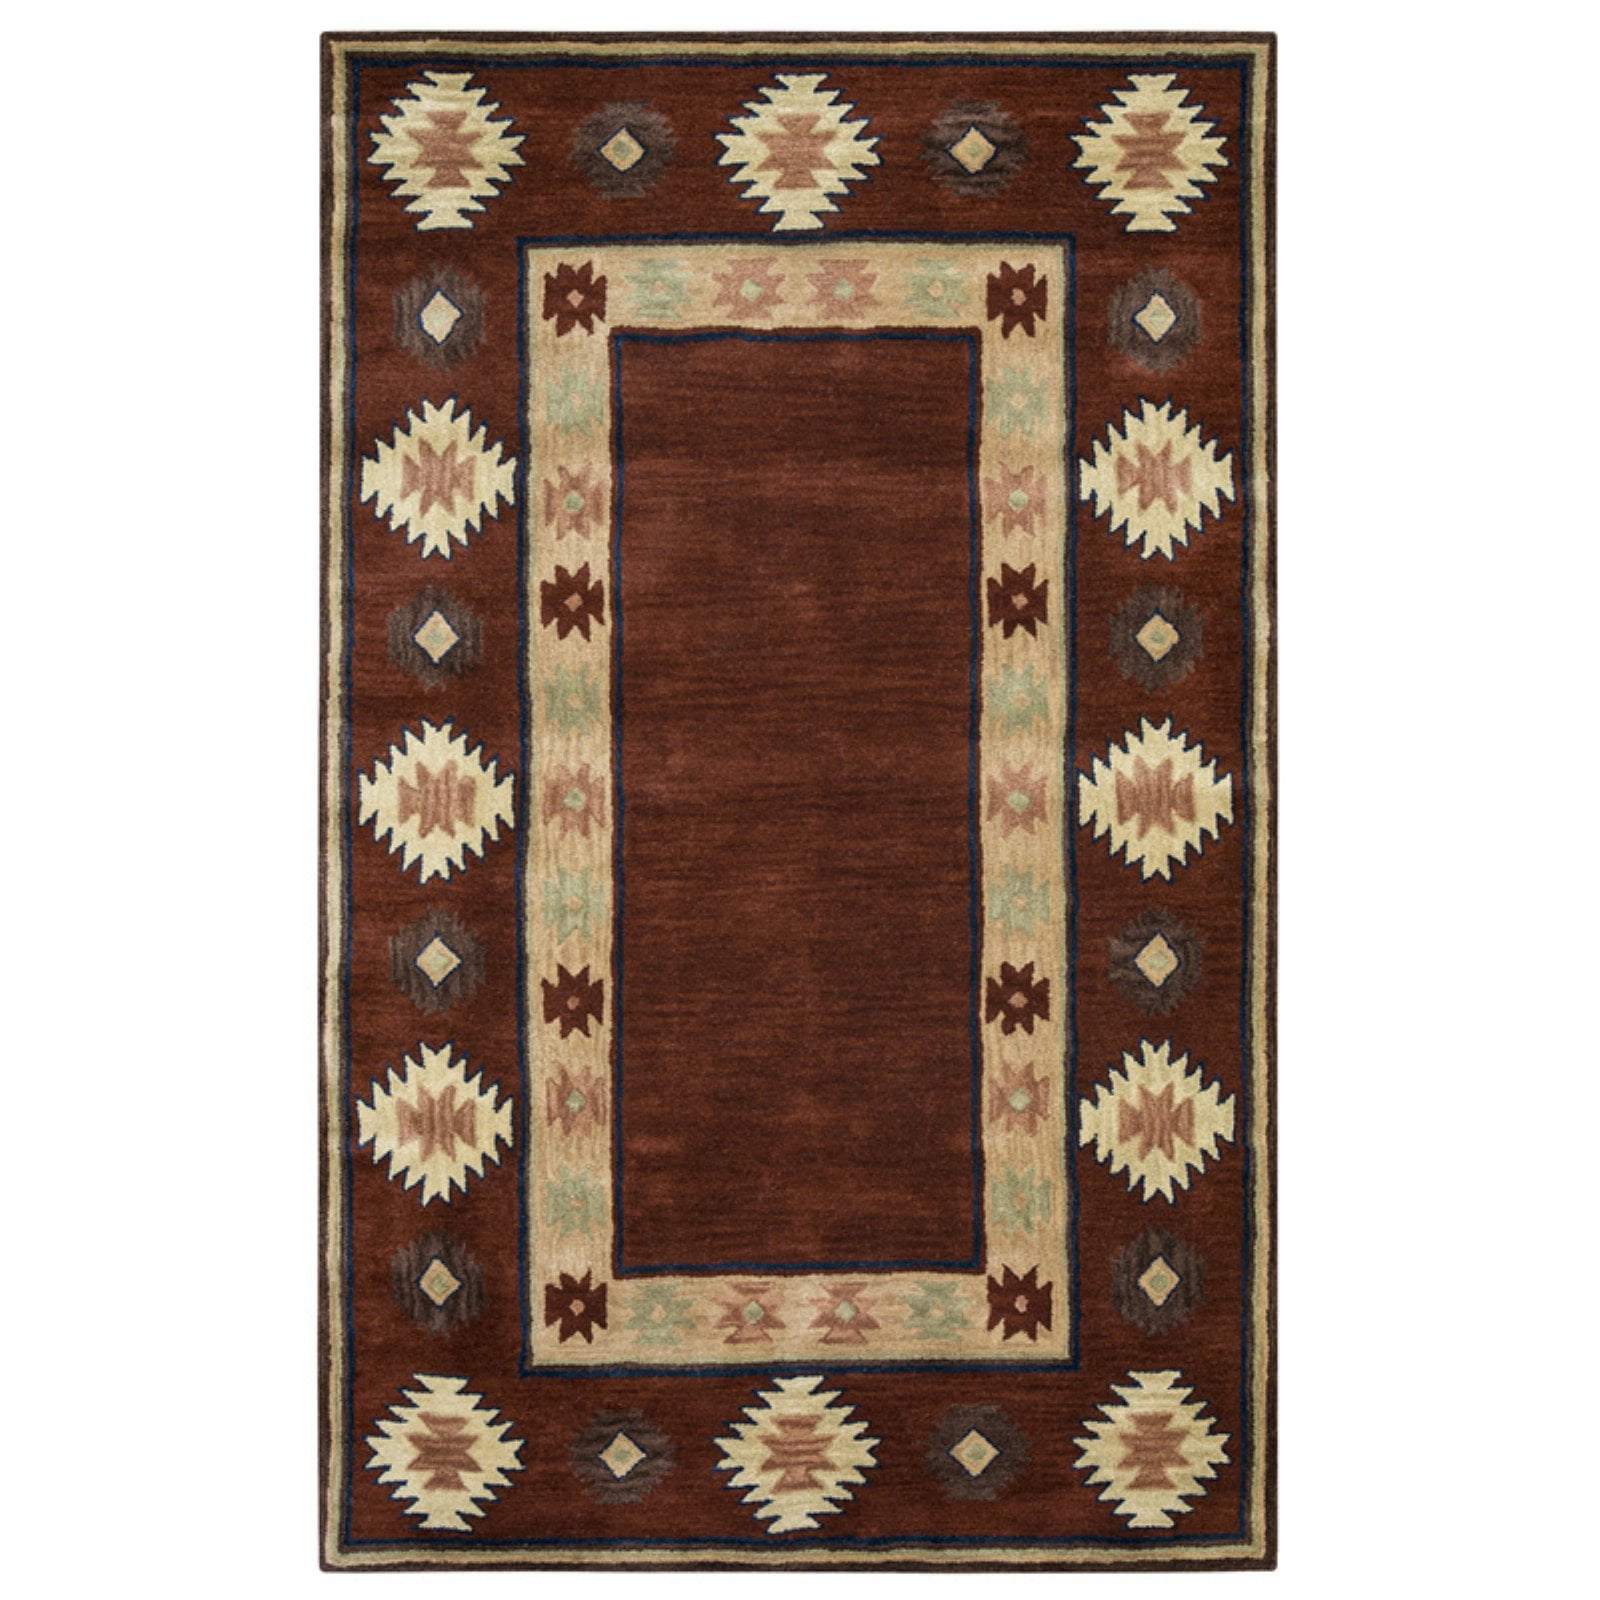 Brown Trees Blossoms Branches Rows Southwestern Area Rug Nature Print 750-05817 